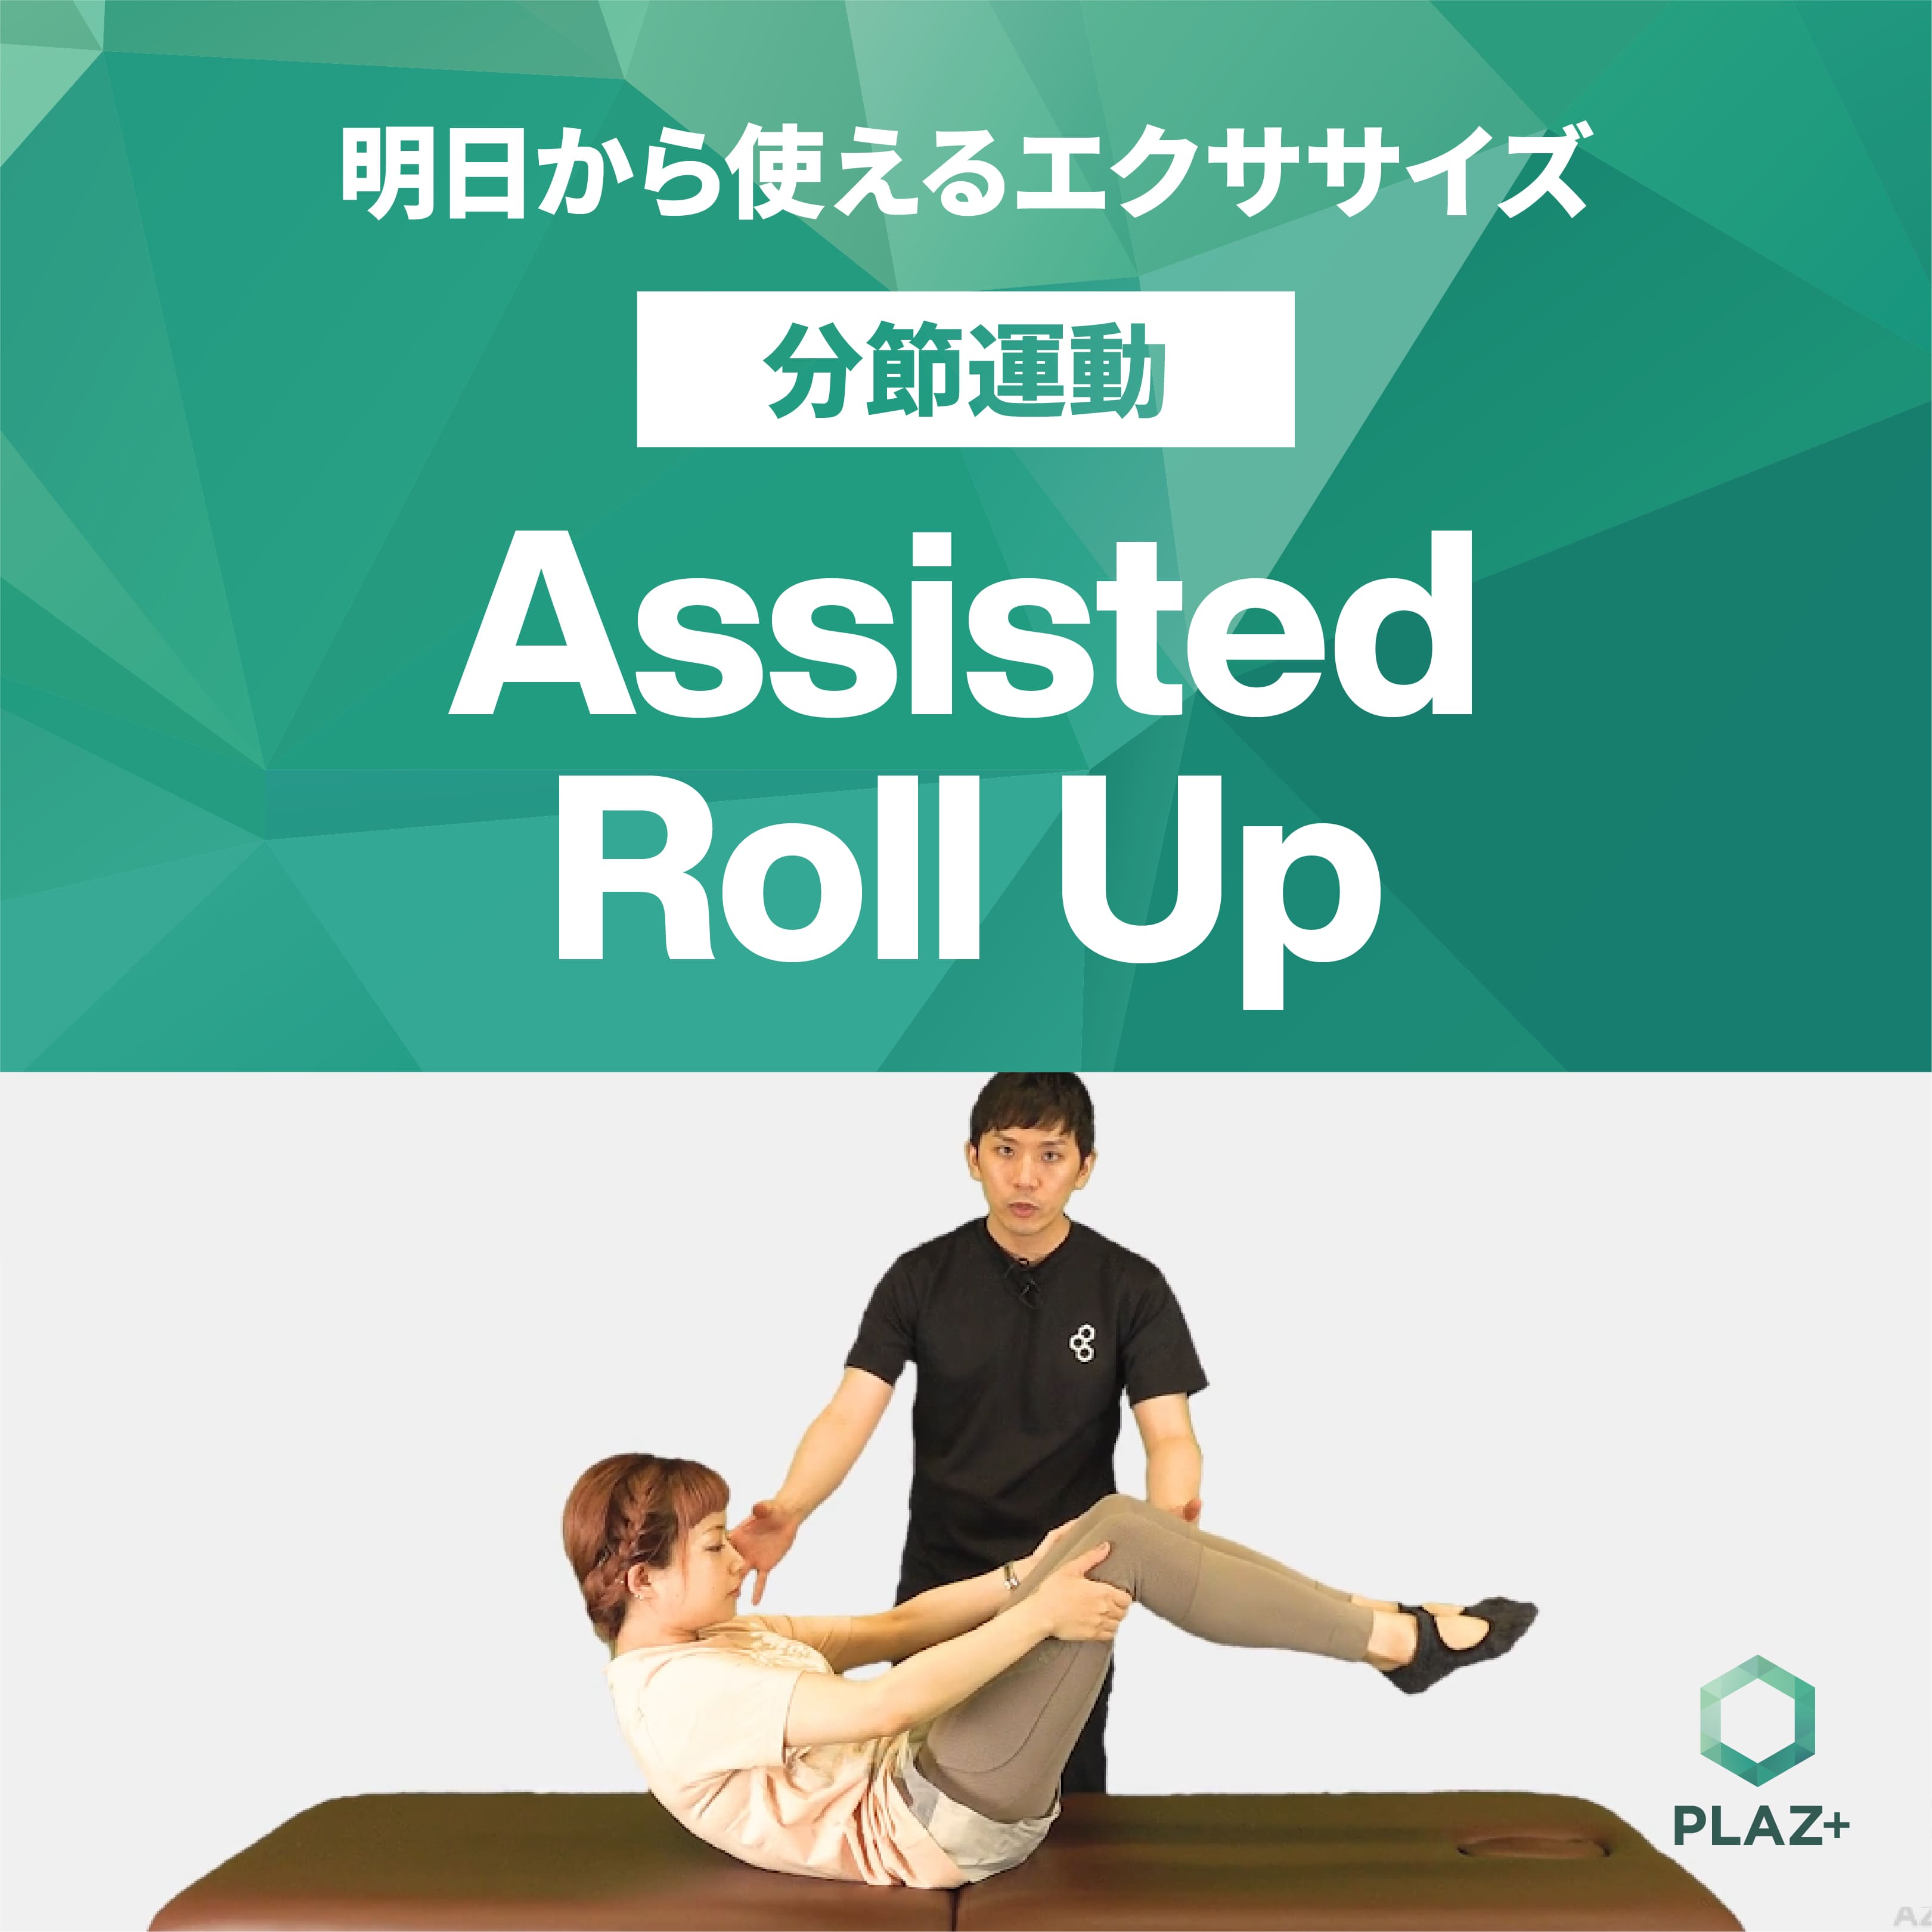 Assisted Roll Up